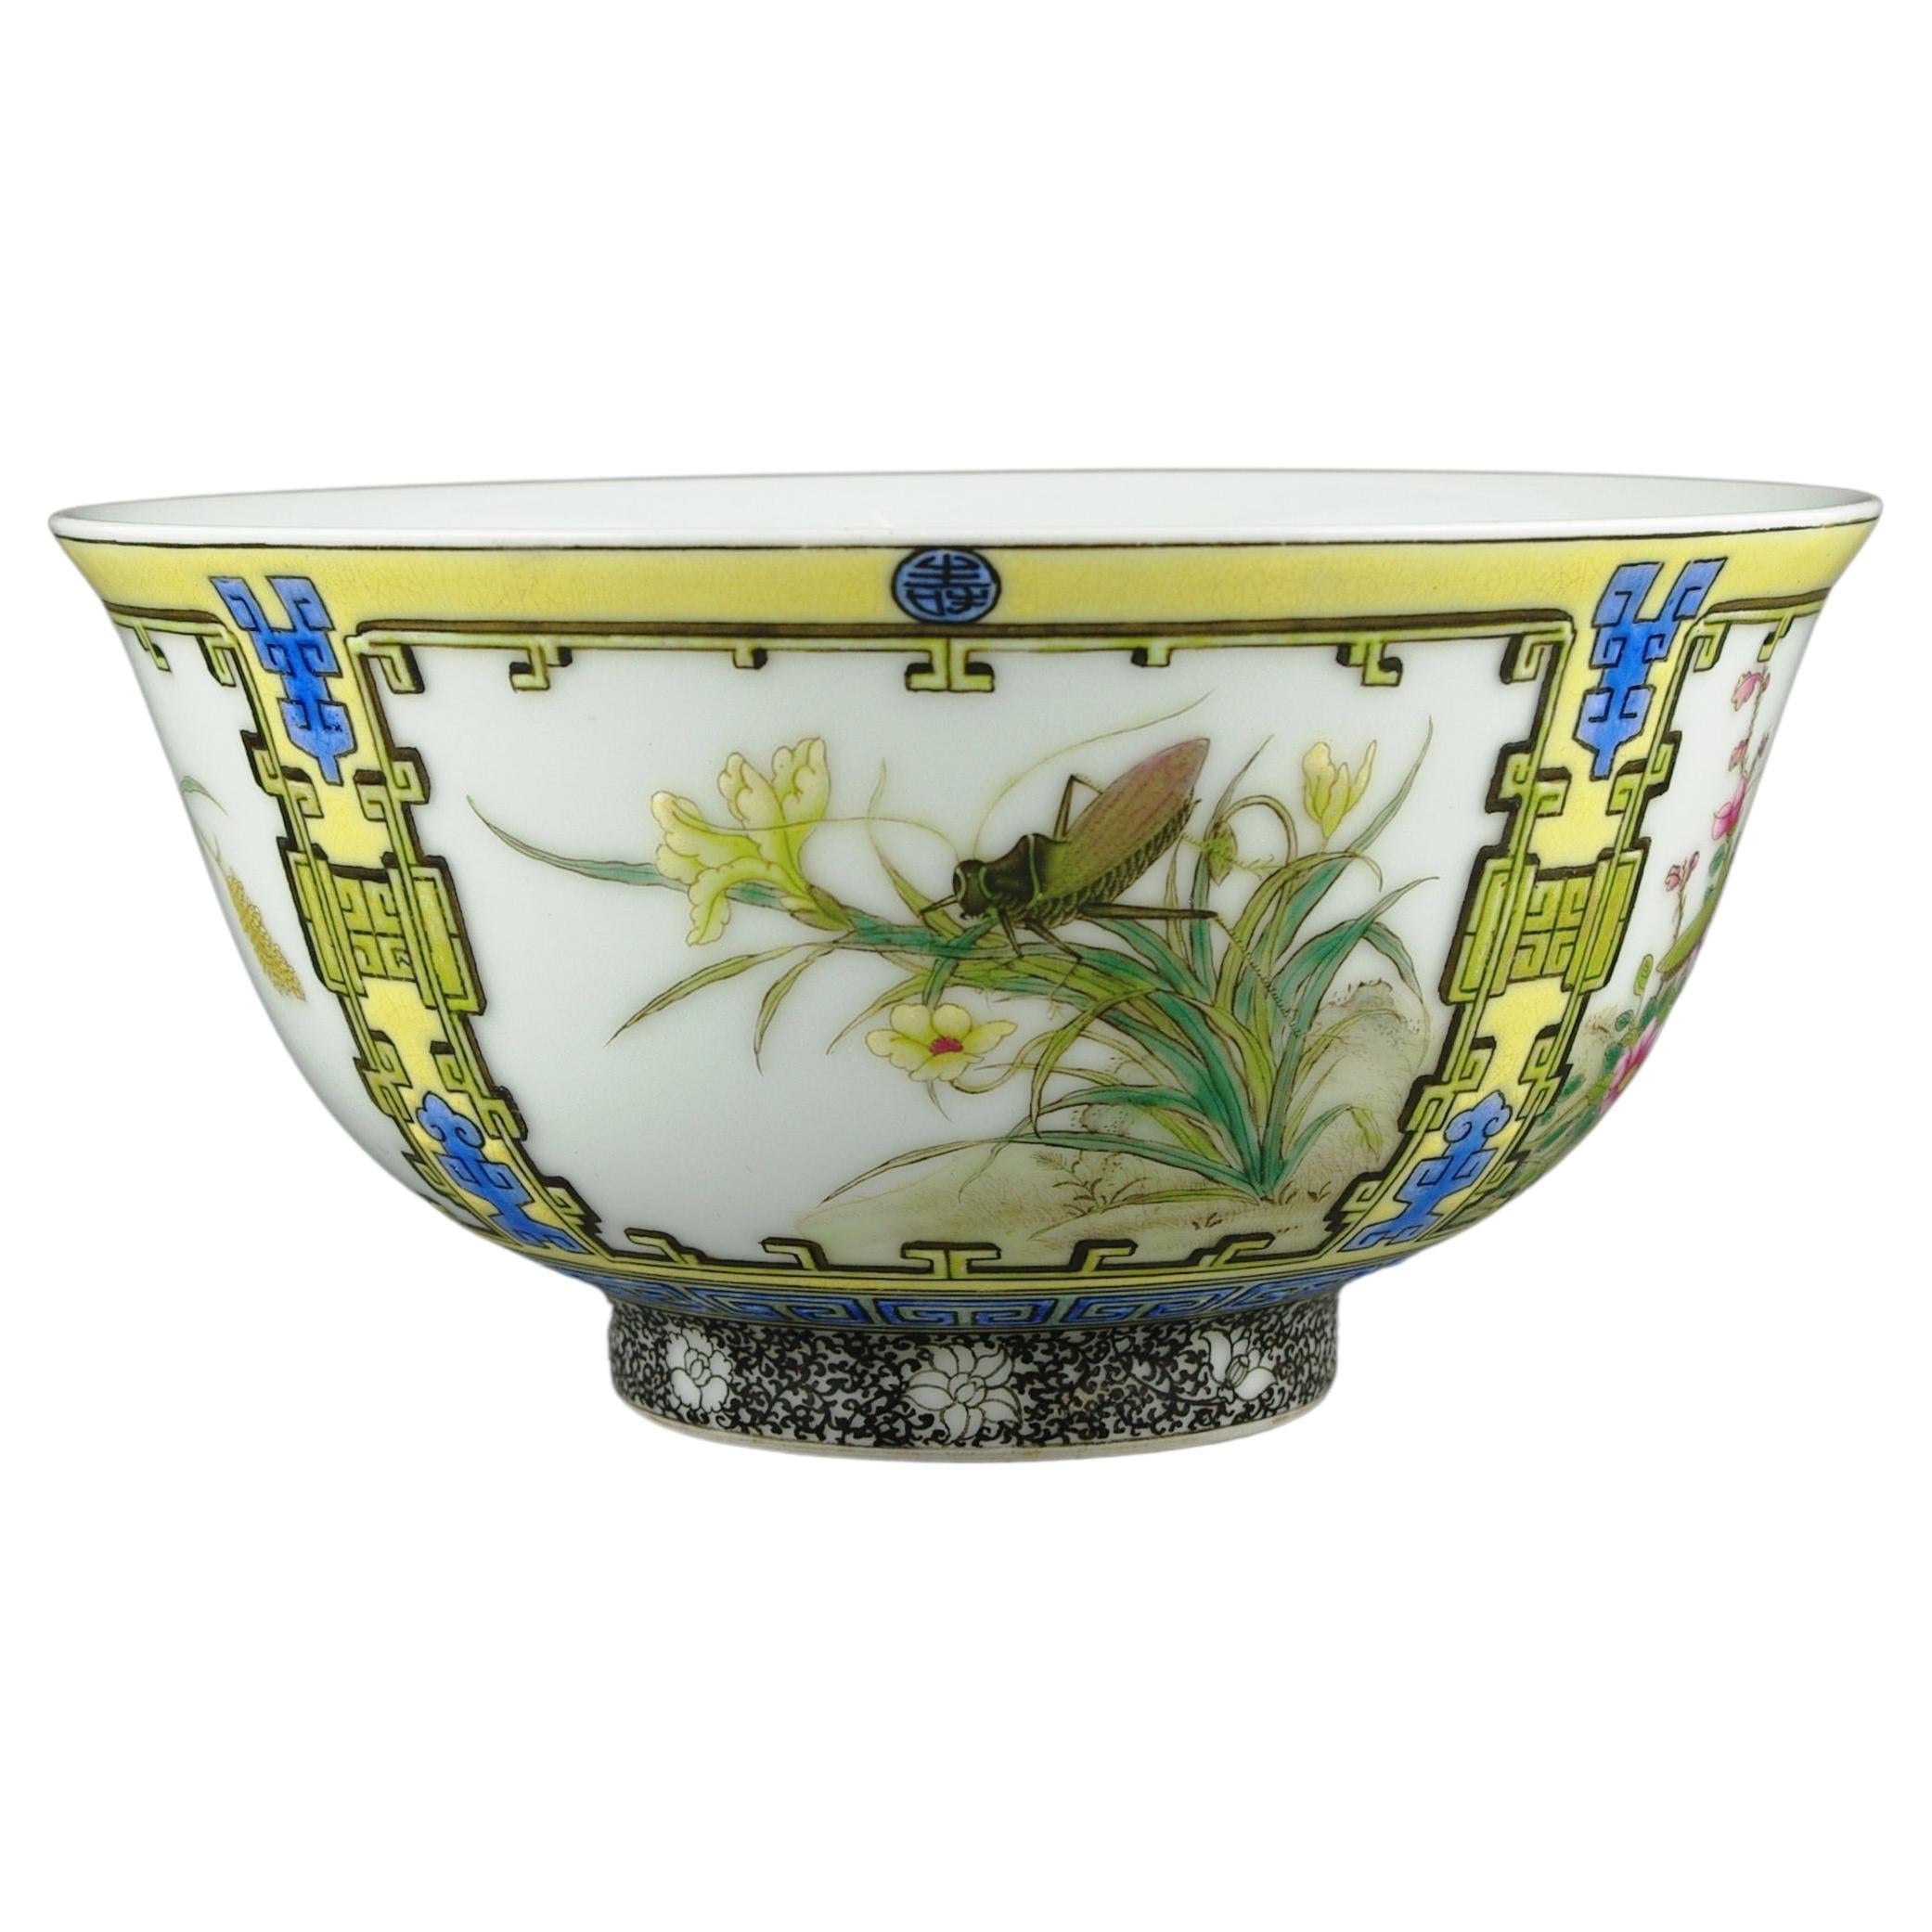 We are pleased to present this masterfully painted 20th-century Chinese porcelain bowl, a splendid piece that beautifully marries the rich traditions of the Qing dynasty style with the finest contemporary craftsmanship. This bowl stands as a vibrant